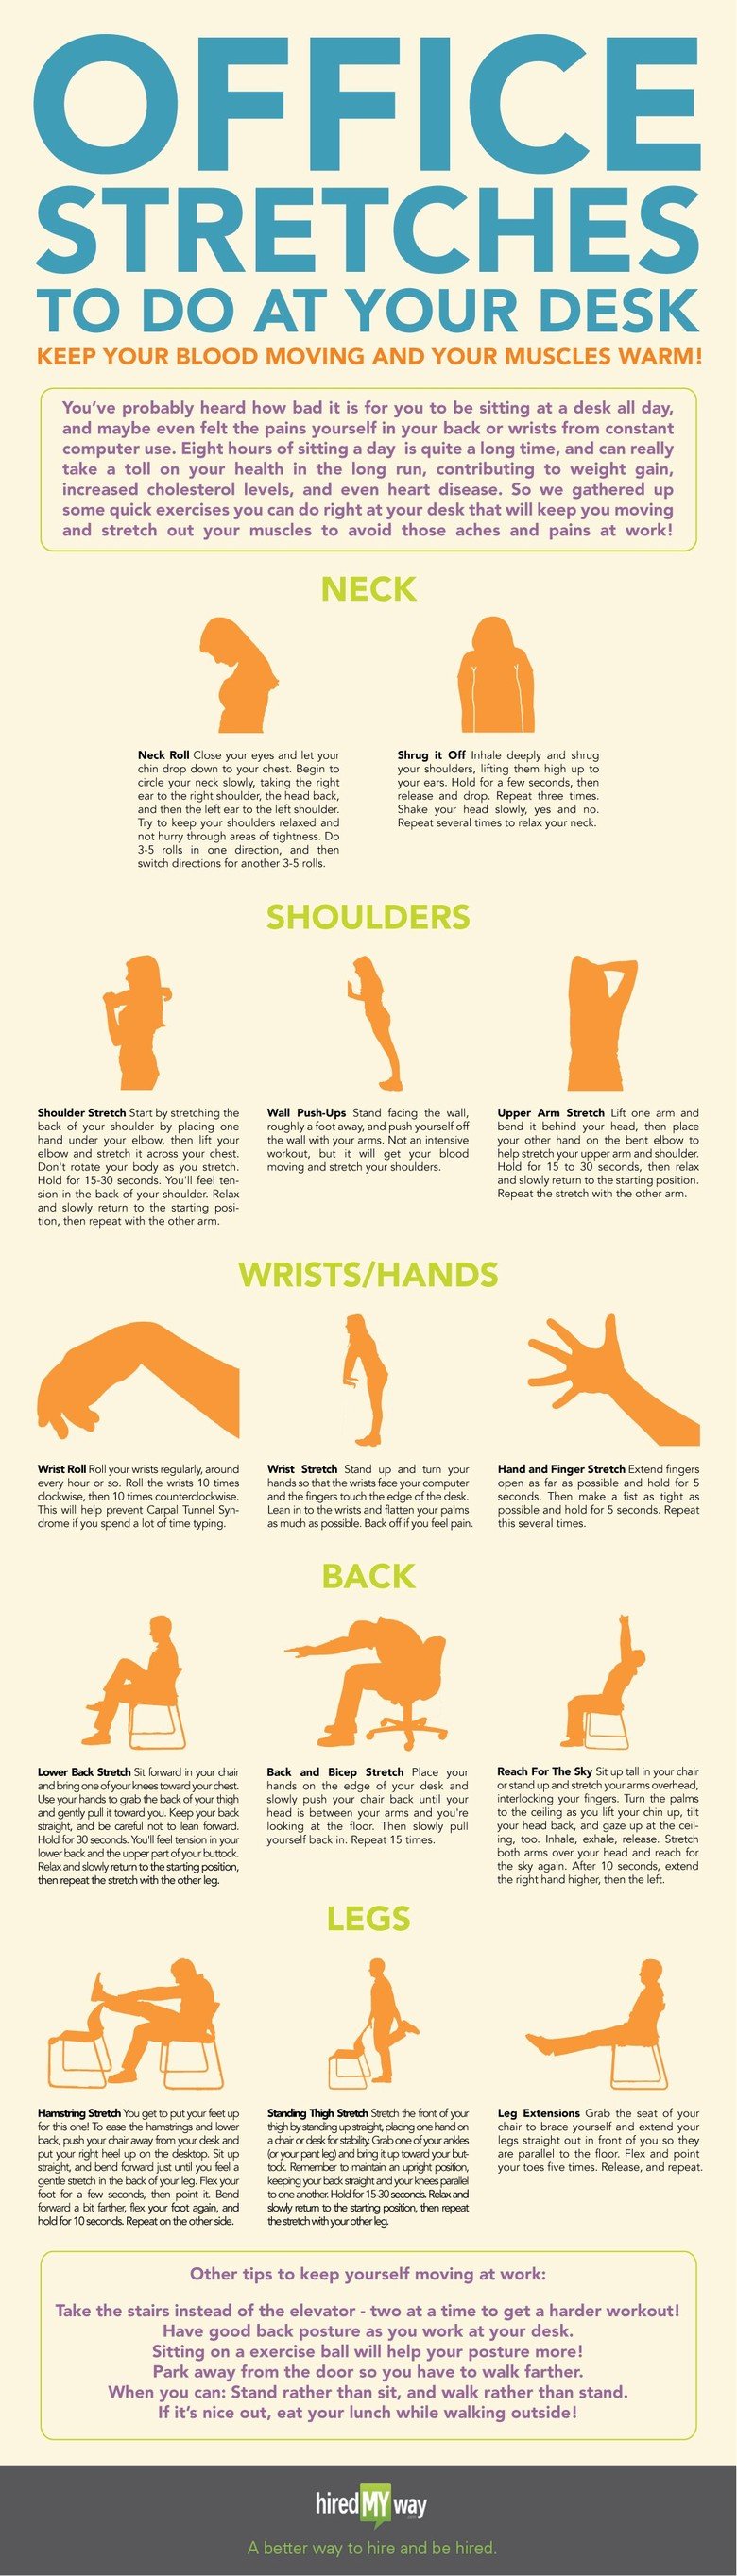 Desk Stretches - How to Stretch at Work | The Muse